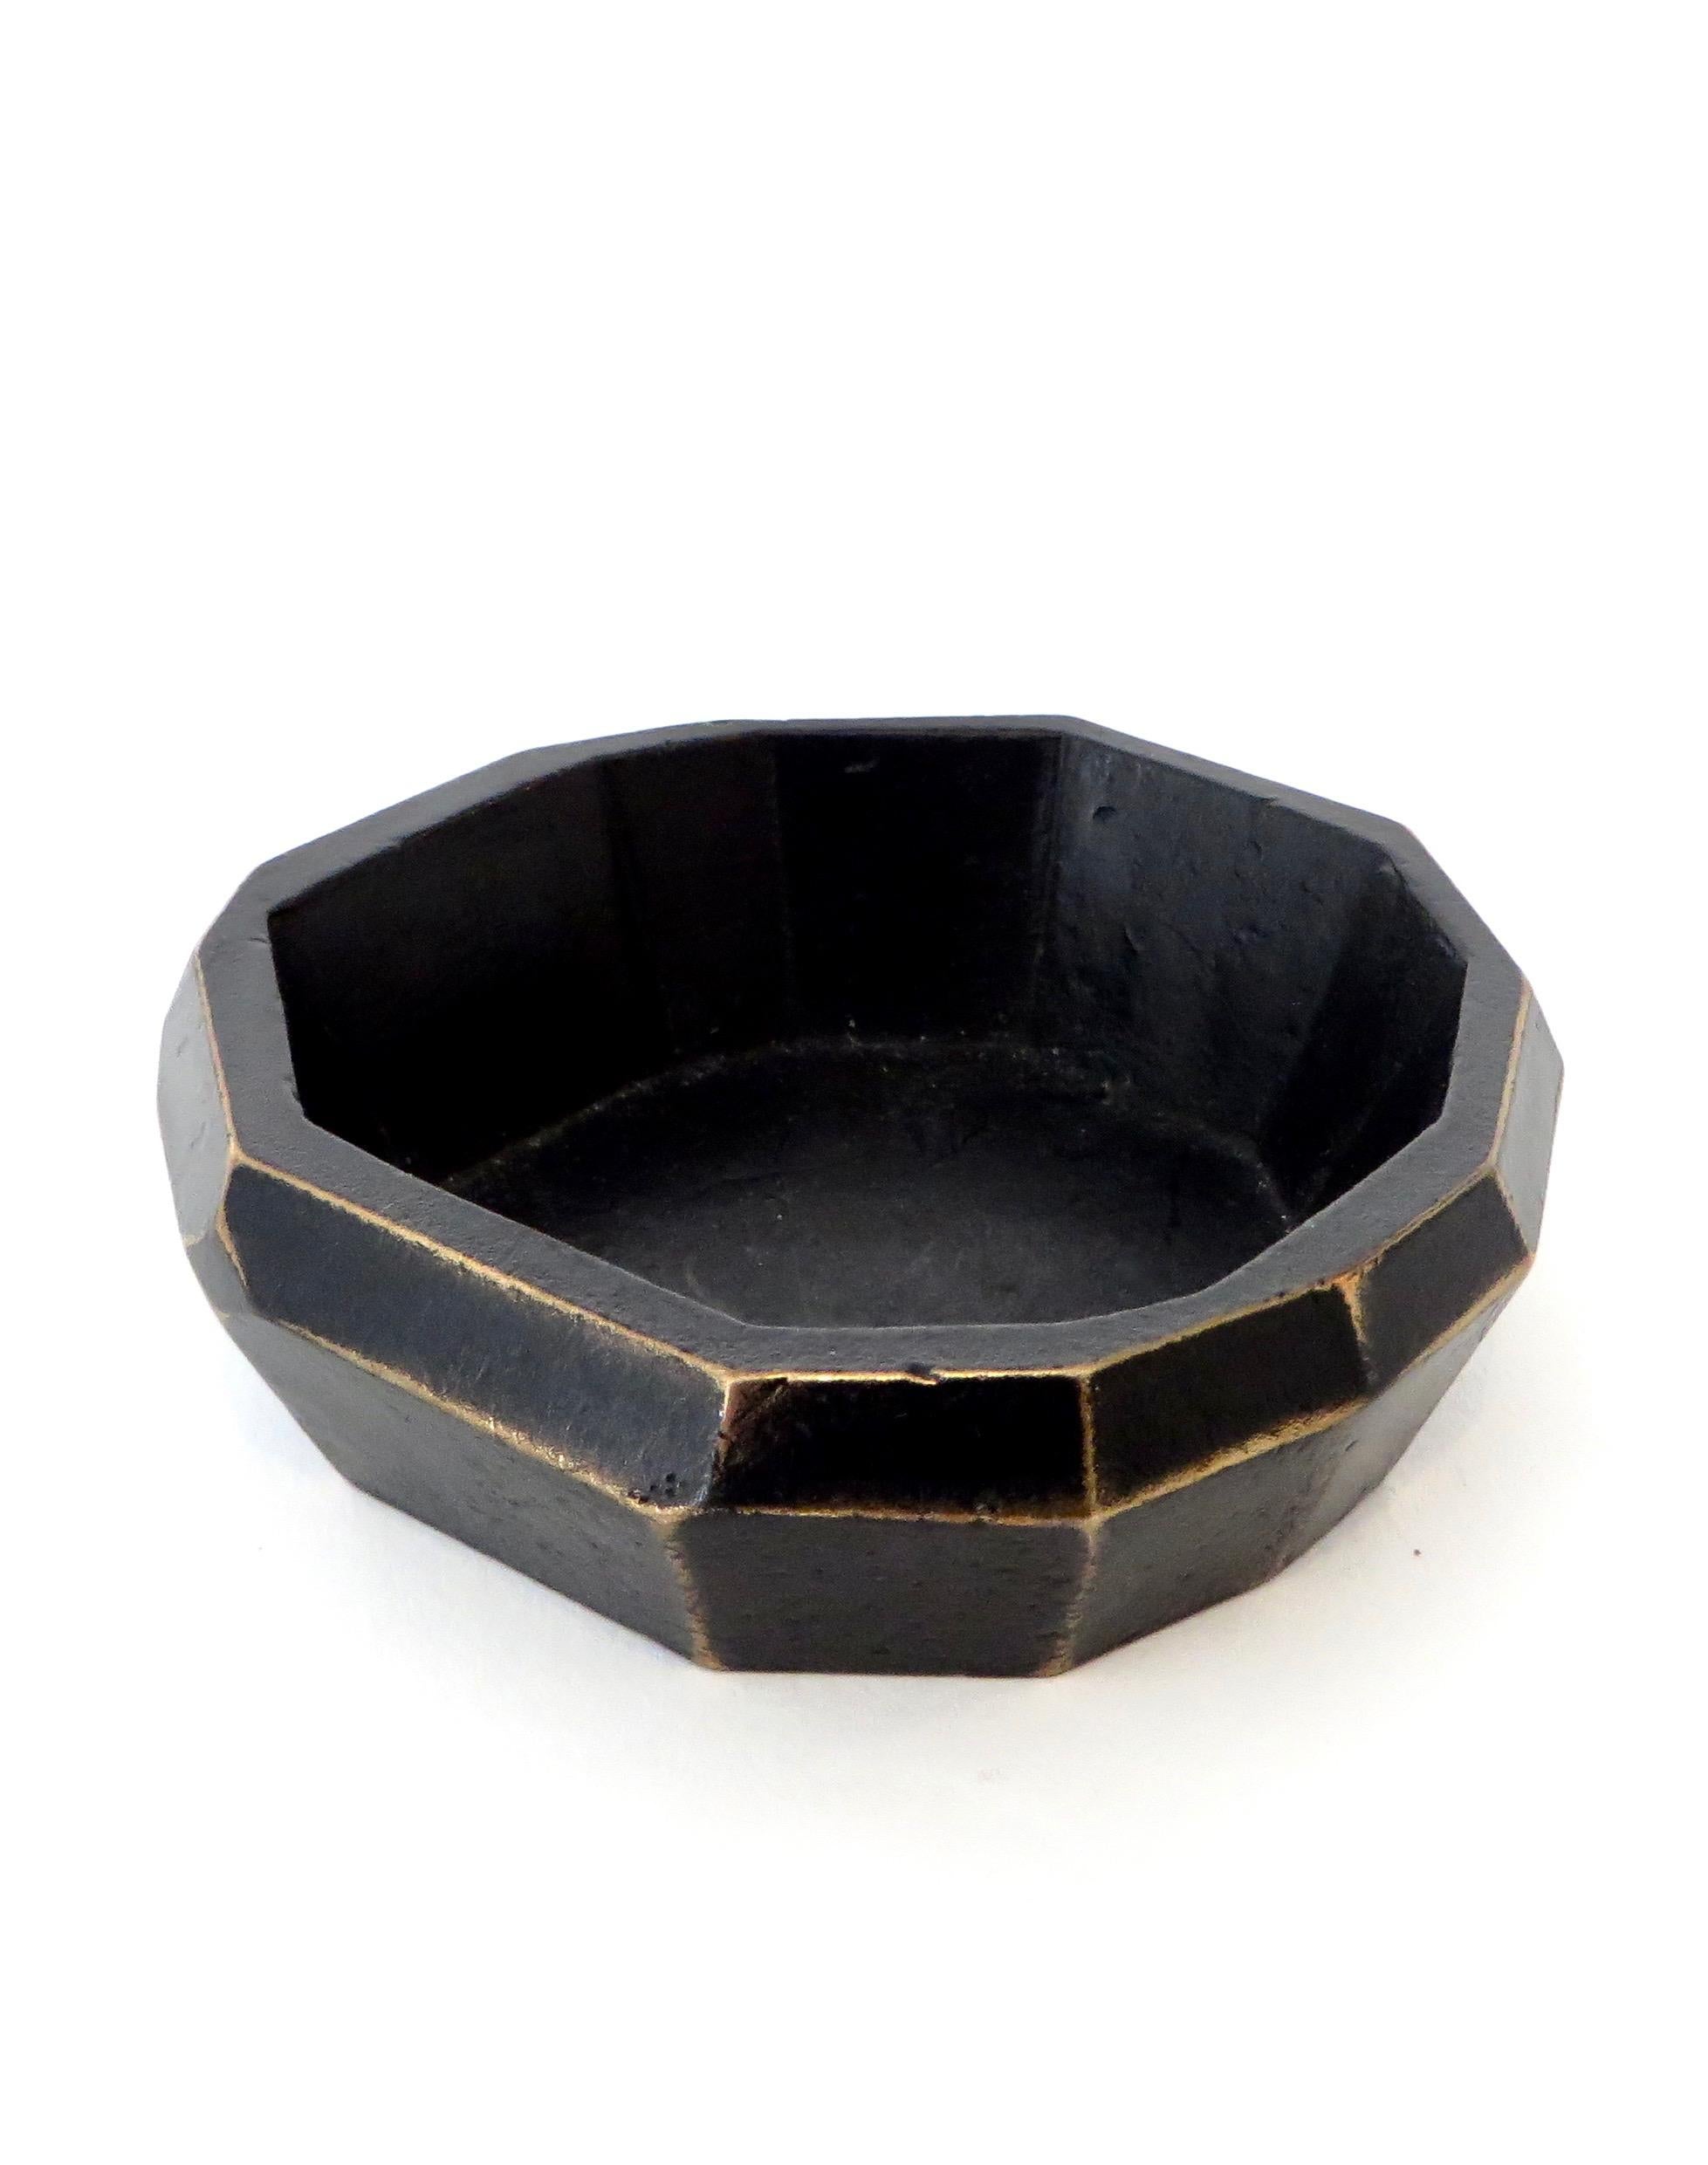 French artists and designers, Garouste et Bonetti abstract form bronze vide poche or small bowl for H Blome 1999 with original box. 
Signed and dated.